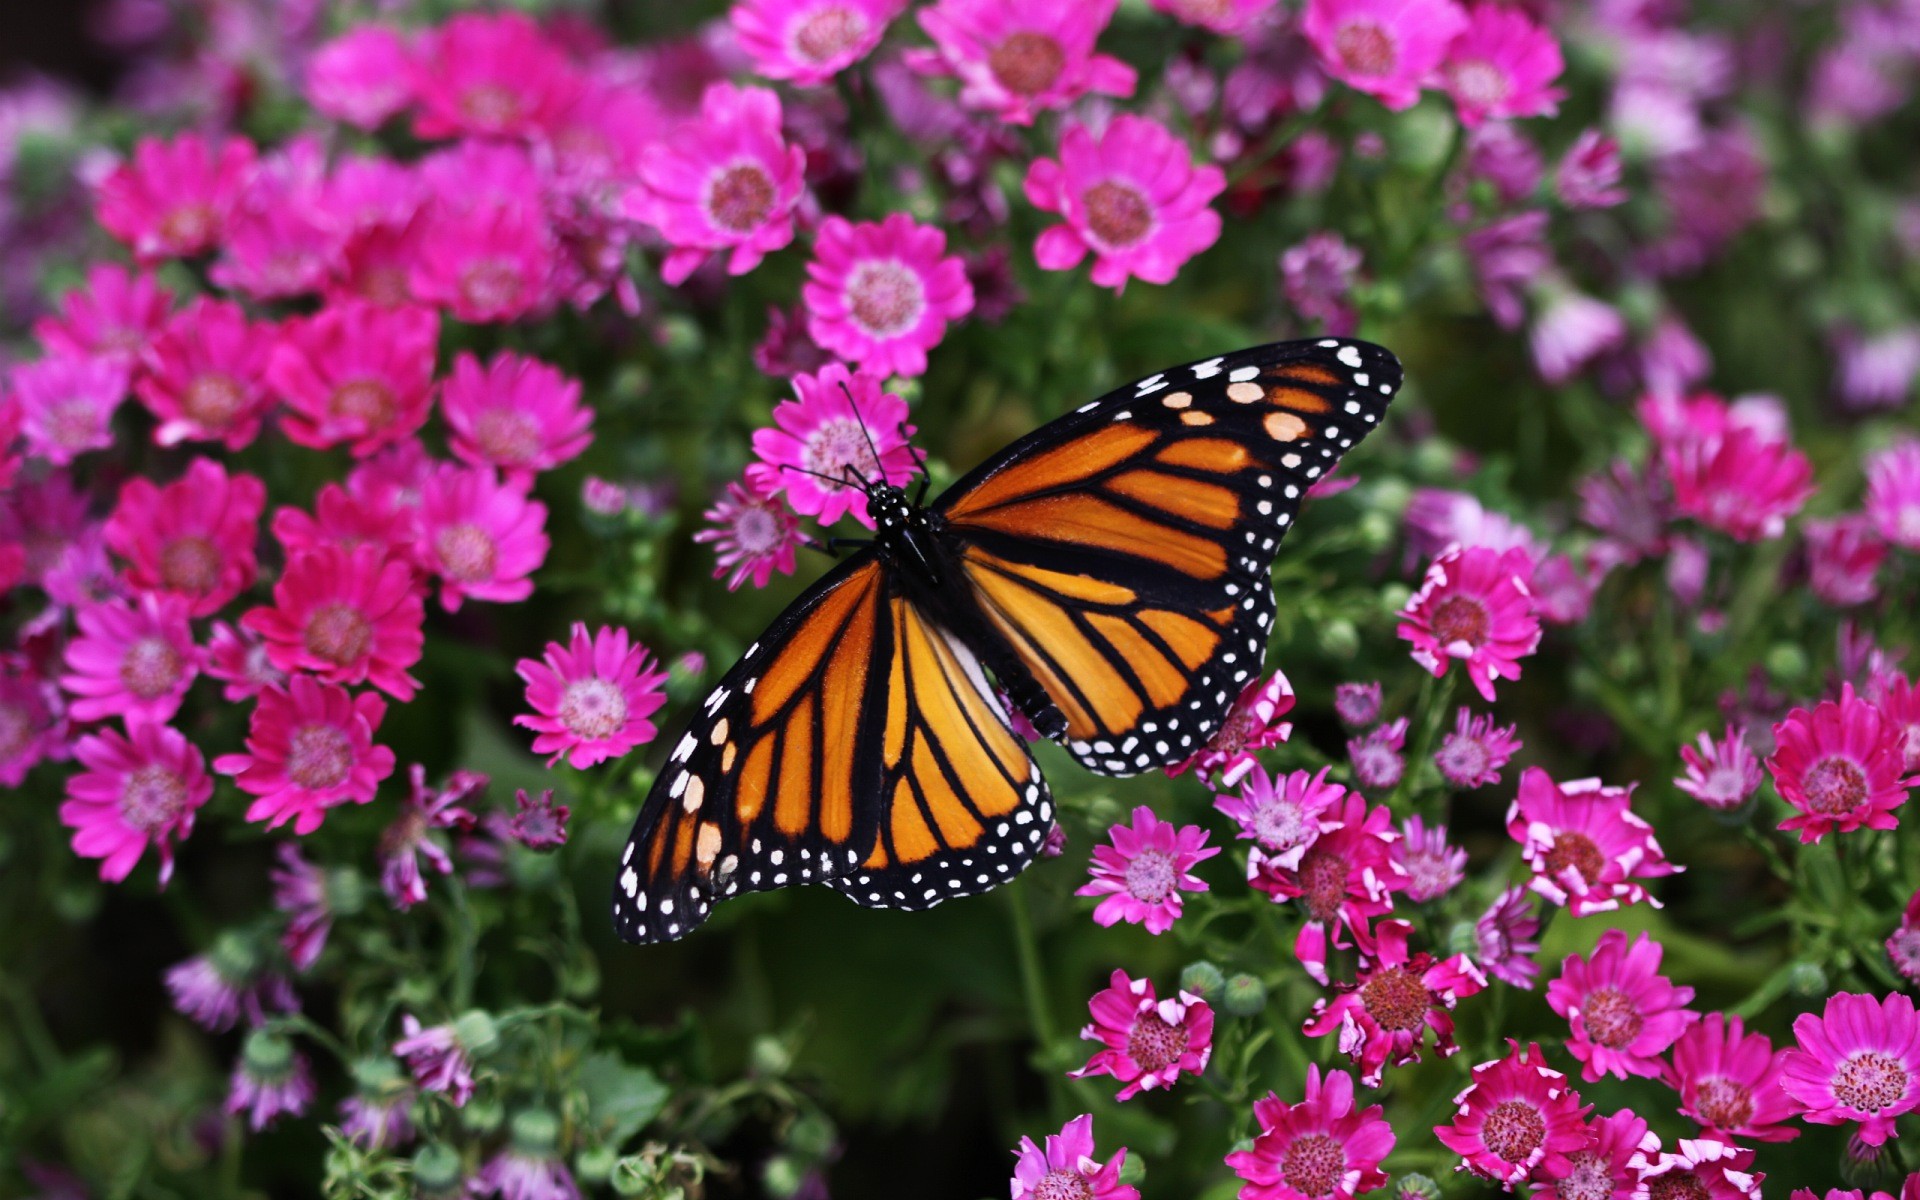 Wallpaper Pictures Of Flowers And Butterflies